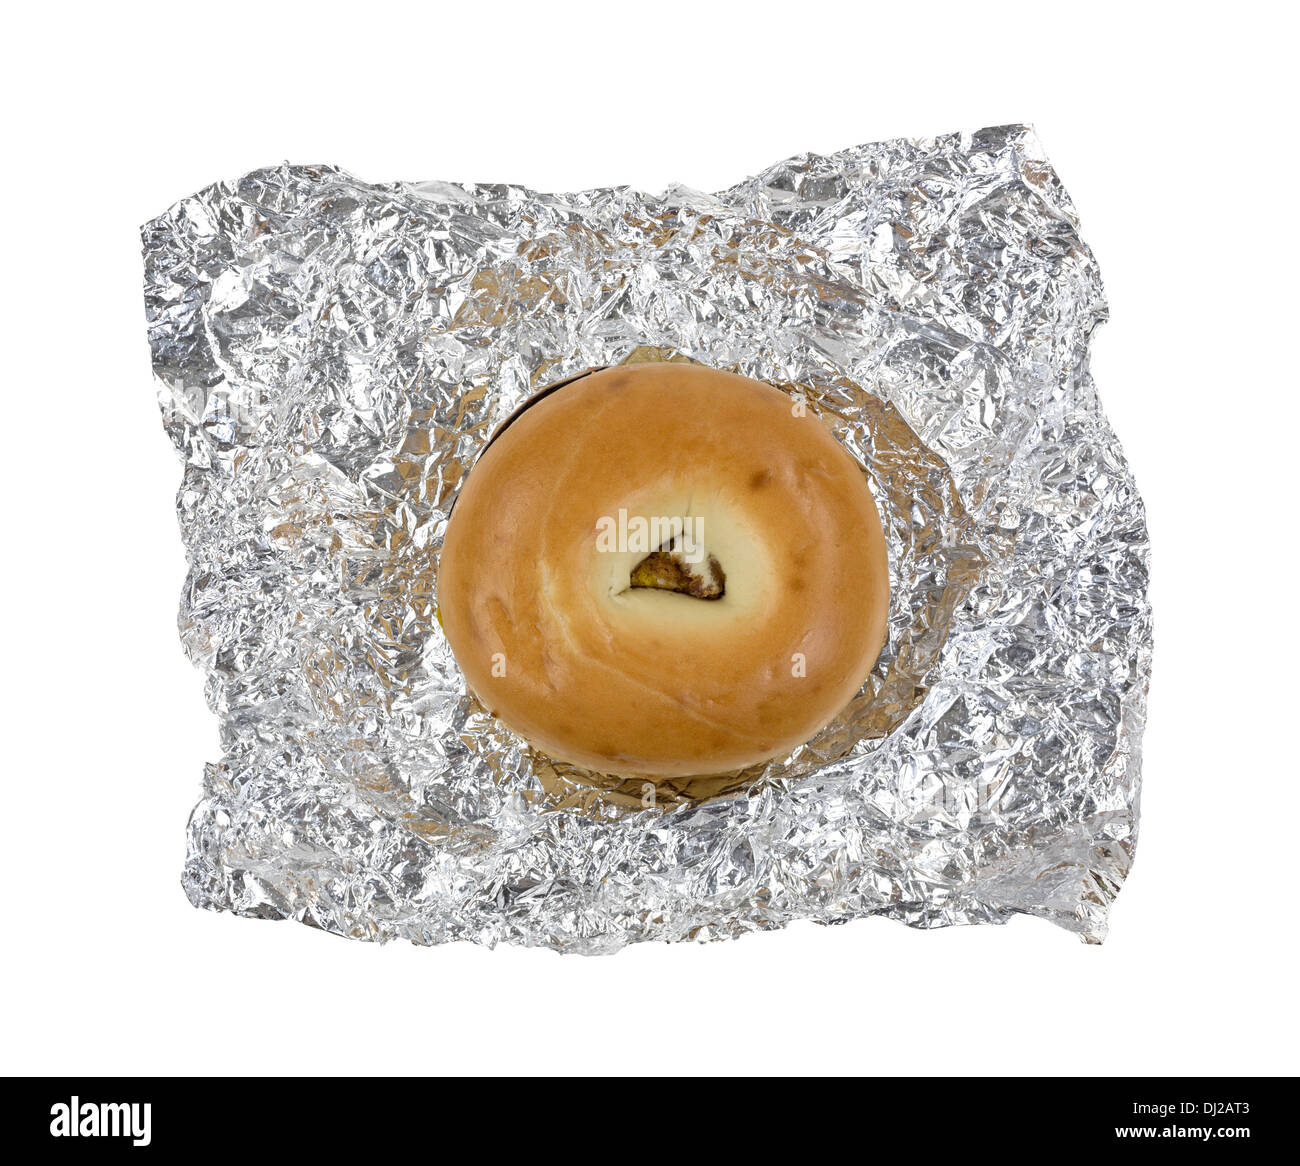 Top view of a breakfast bagel atop wrinkled aluminum foil on a white background. Stock Photo